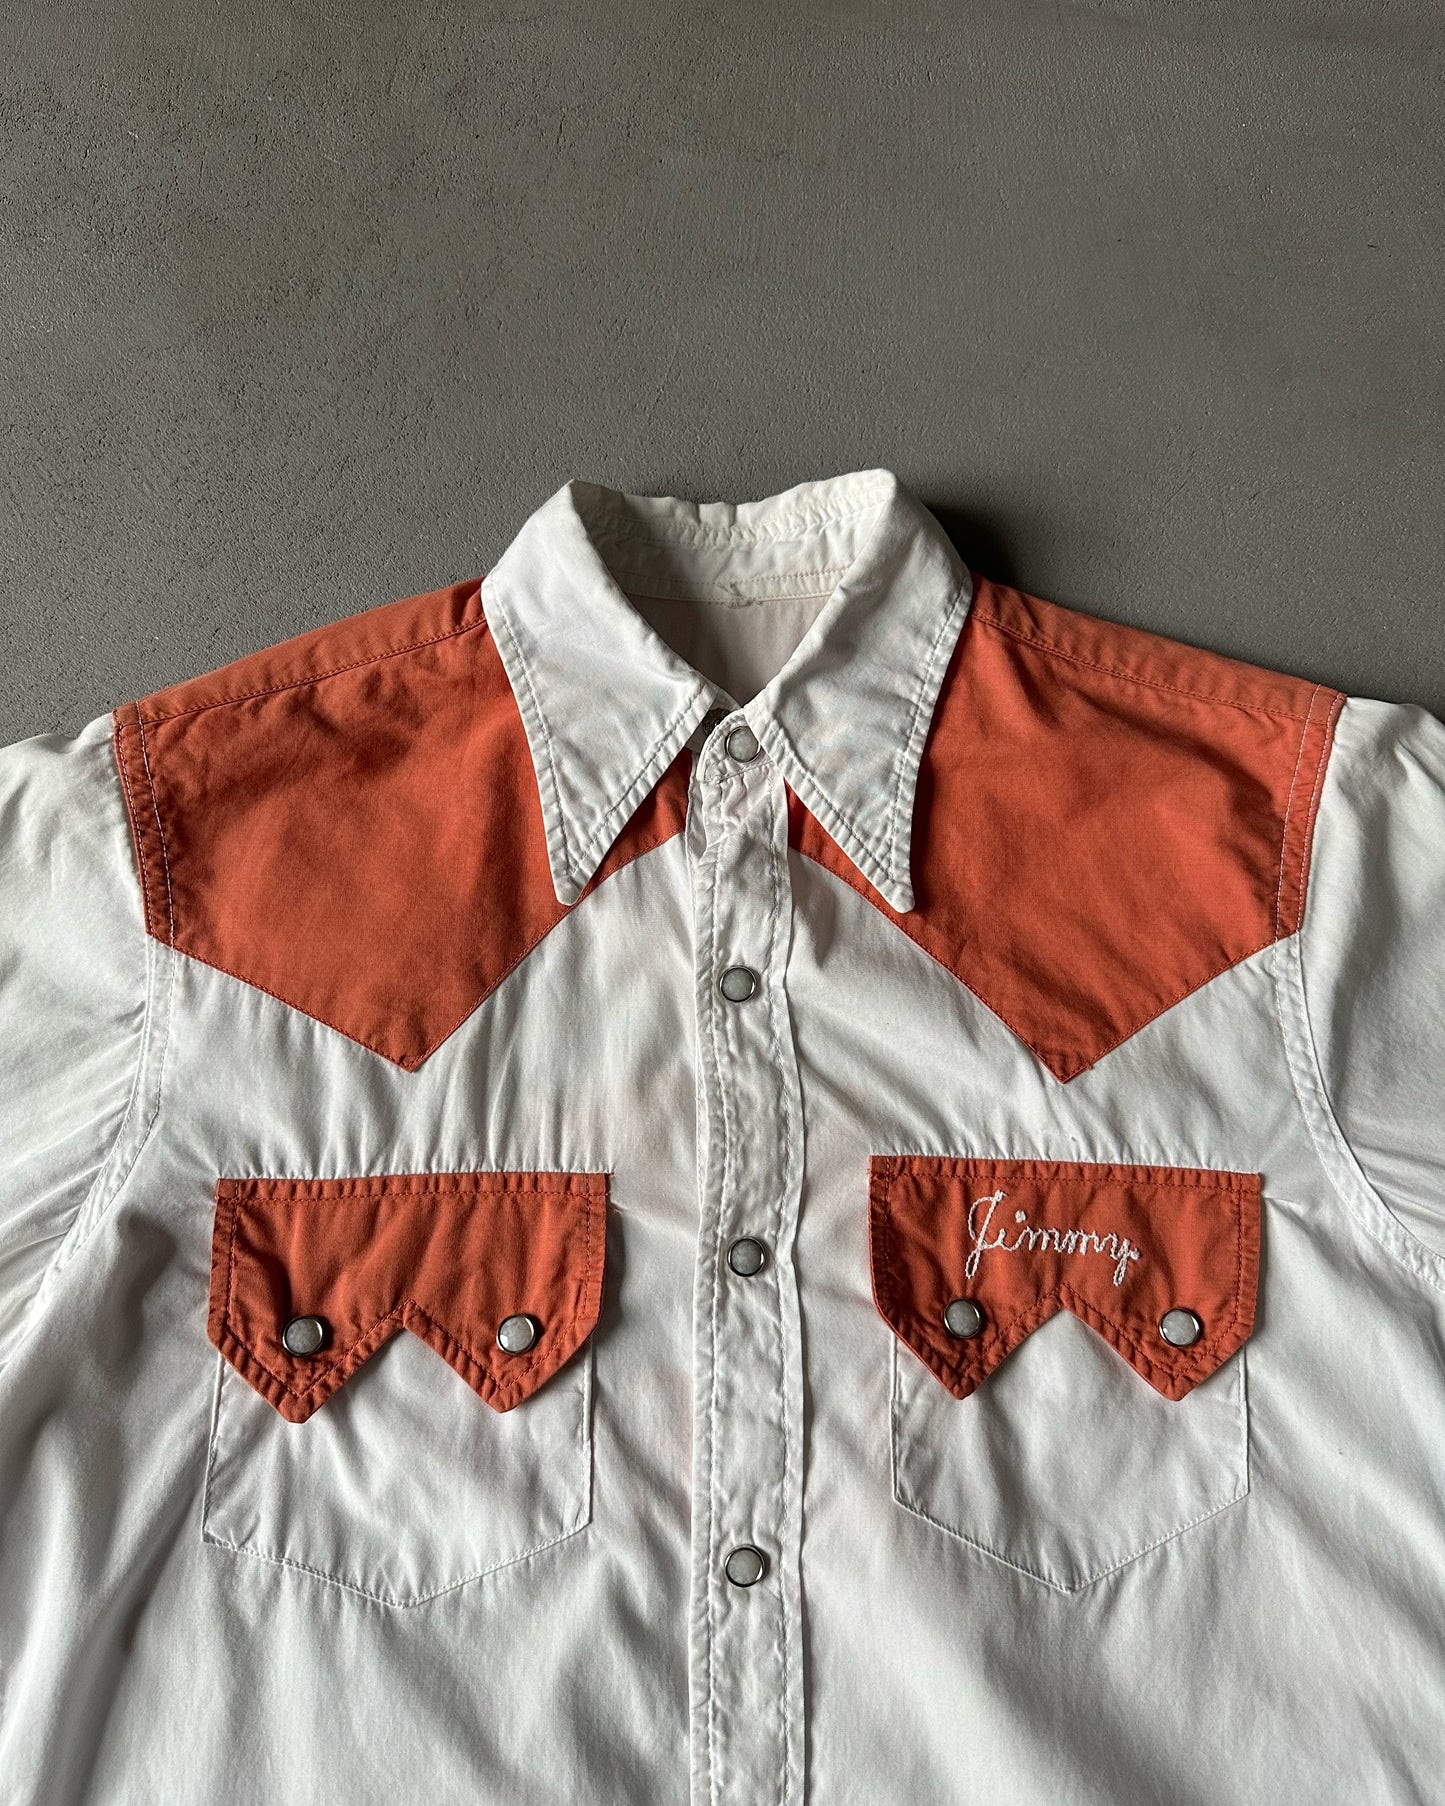 1960s - White/Coral "Cowboys" Chainstitch Pearl Snap Shirt - XS(Long)